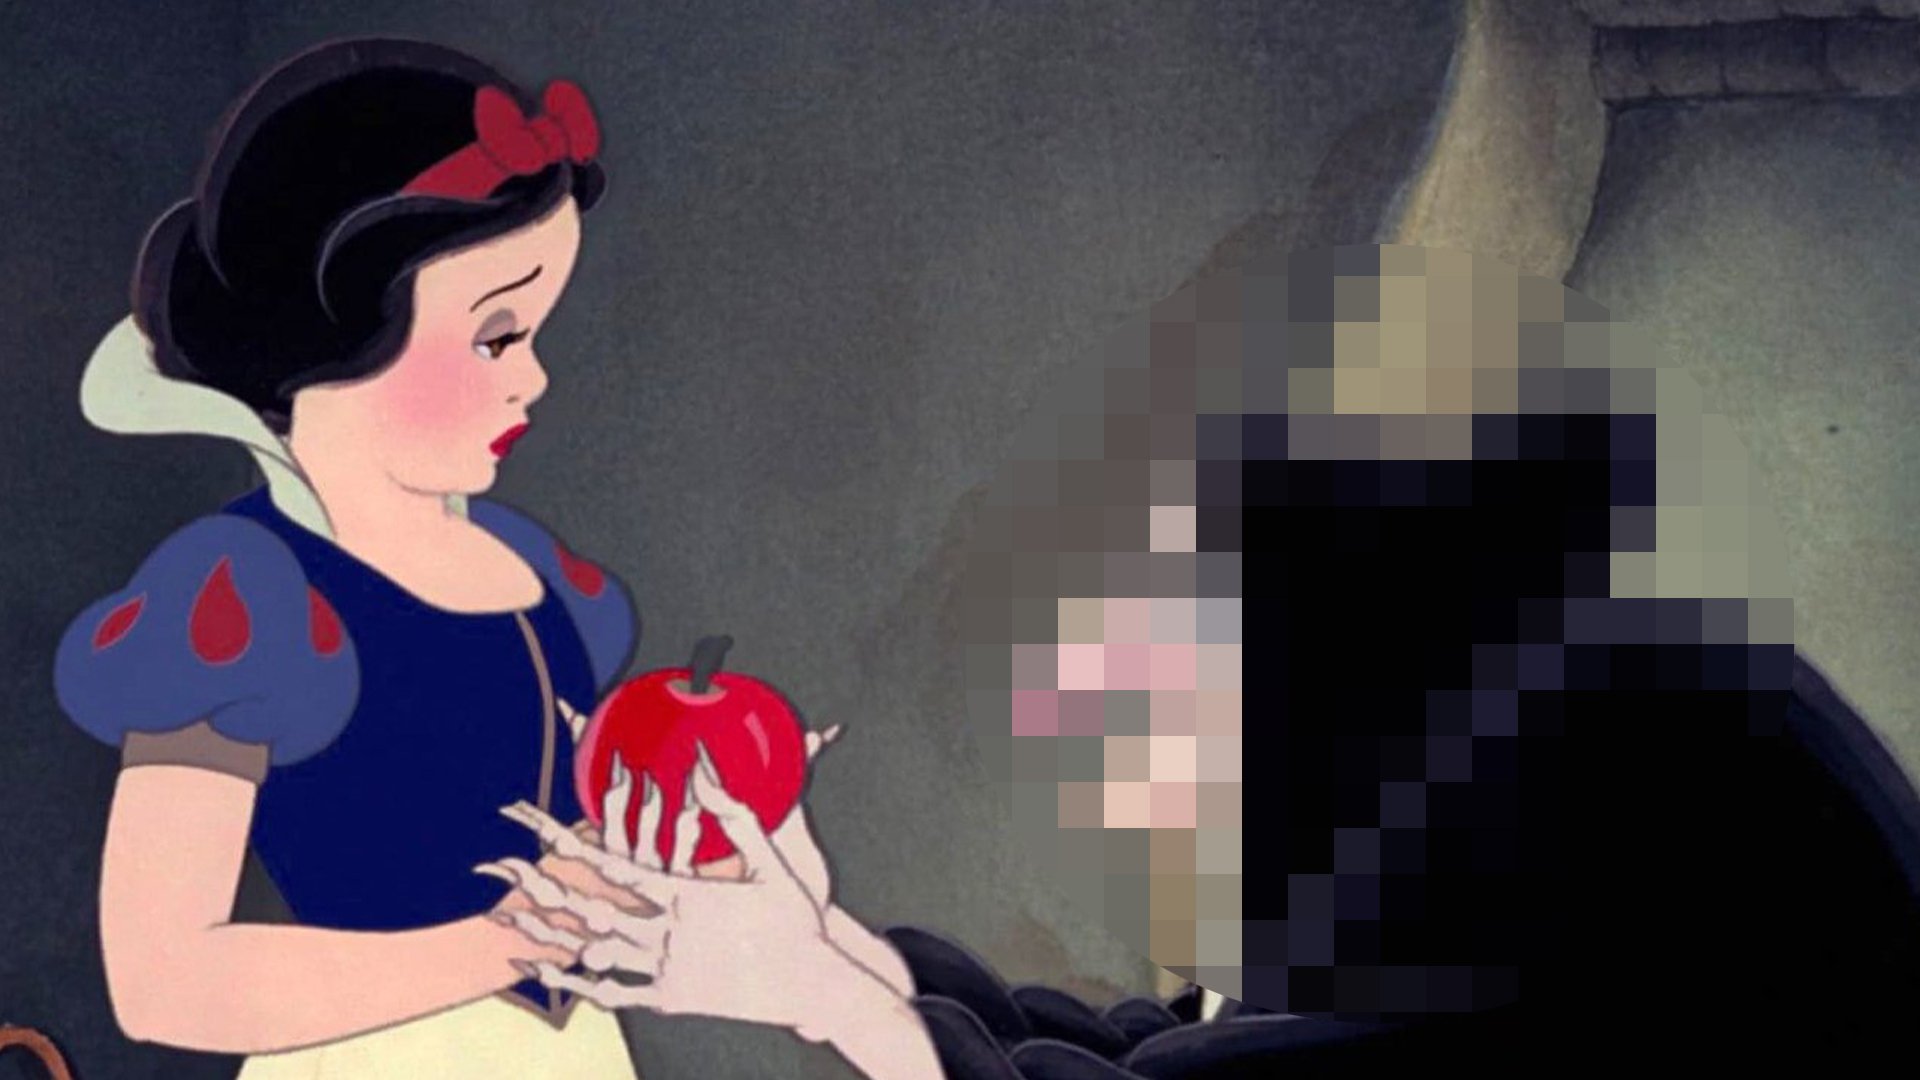 A scene from Snow White